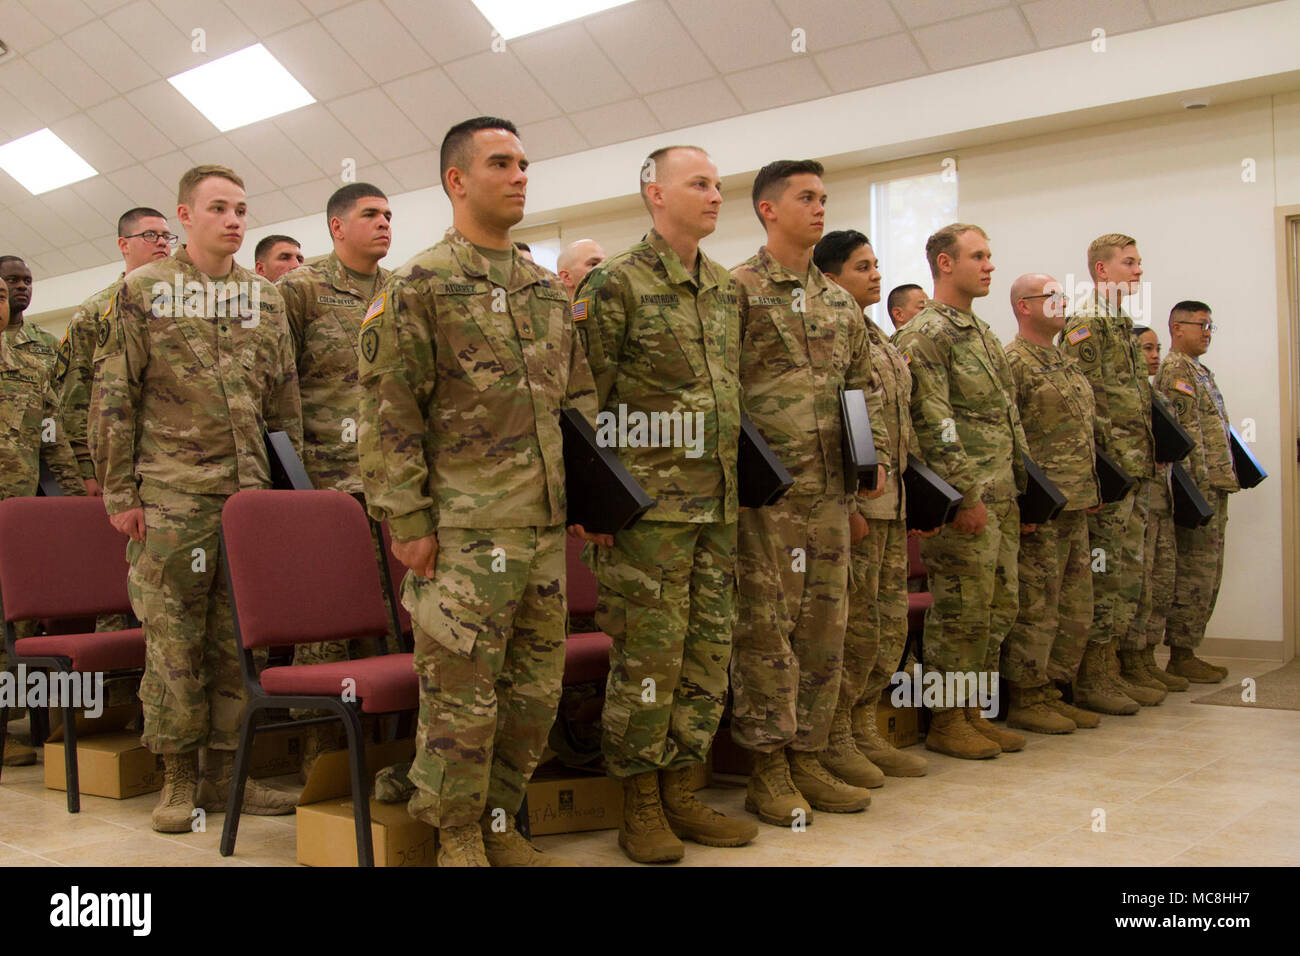 US Army Soldiers from the 319th Expeditionary Signal Battalion, 505th Signal Brigade, 335th Signal Command [Theater], stand at attention after receiving awards for a job well done while overseas at North Fort Hood, Texas, on March 24, 2018. This reserve battalion walked away from their civilian lives to enhance and train American Allies in cutting edge cyber security and warfare techniques all across the Horn of Africa, strengthening communications between the US and its African Allies. Stock Photo